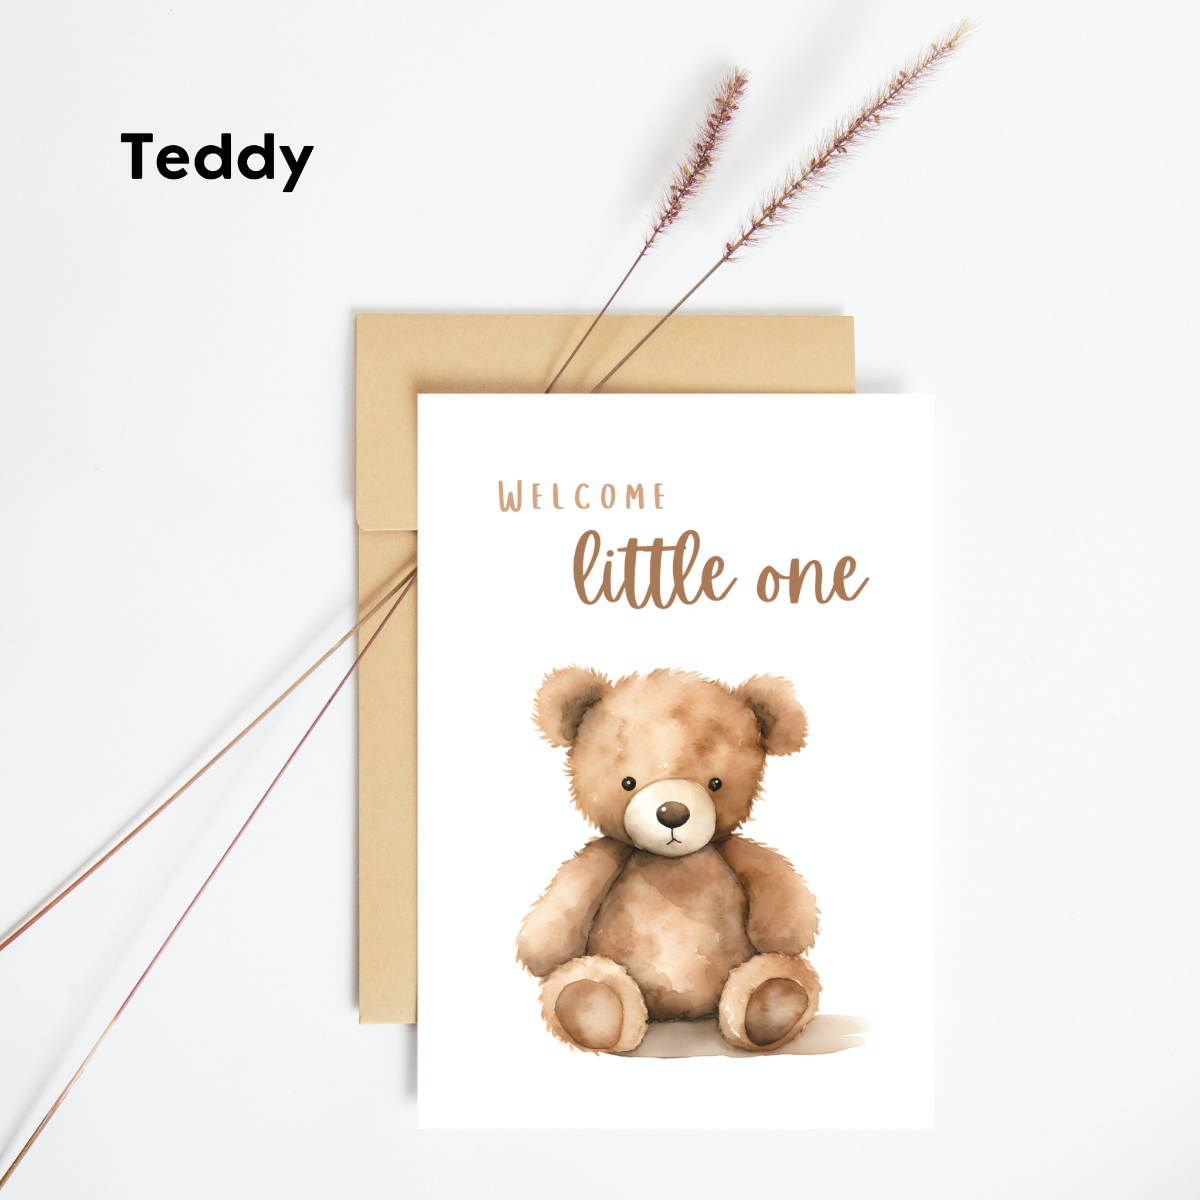 Greeting Cards - New Baby